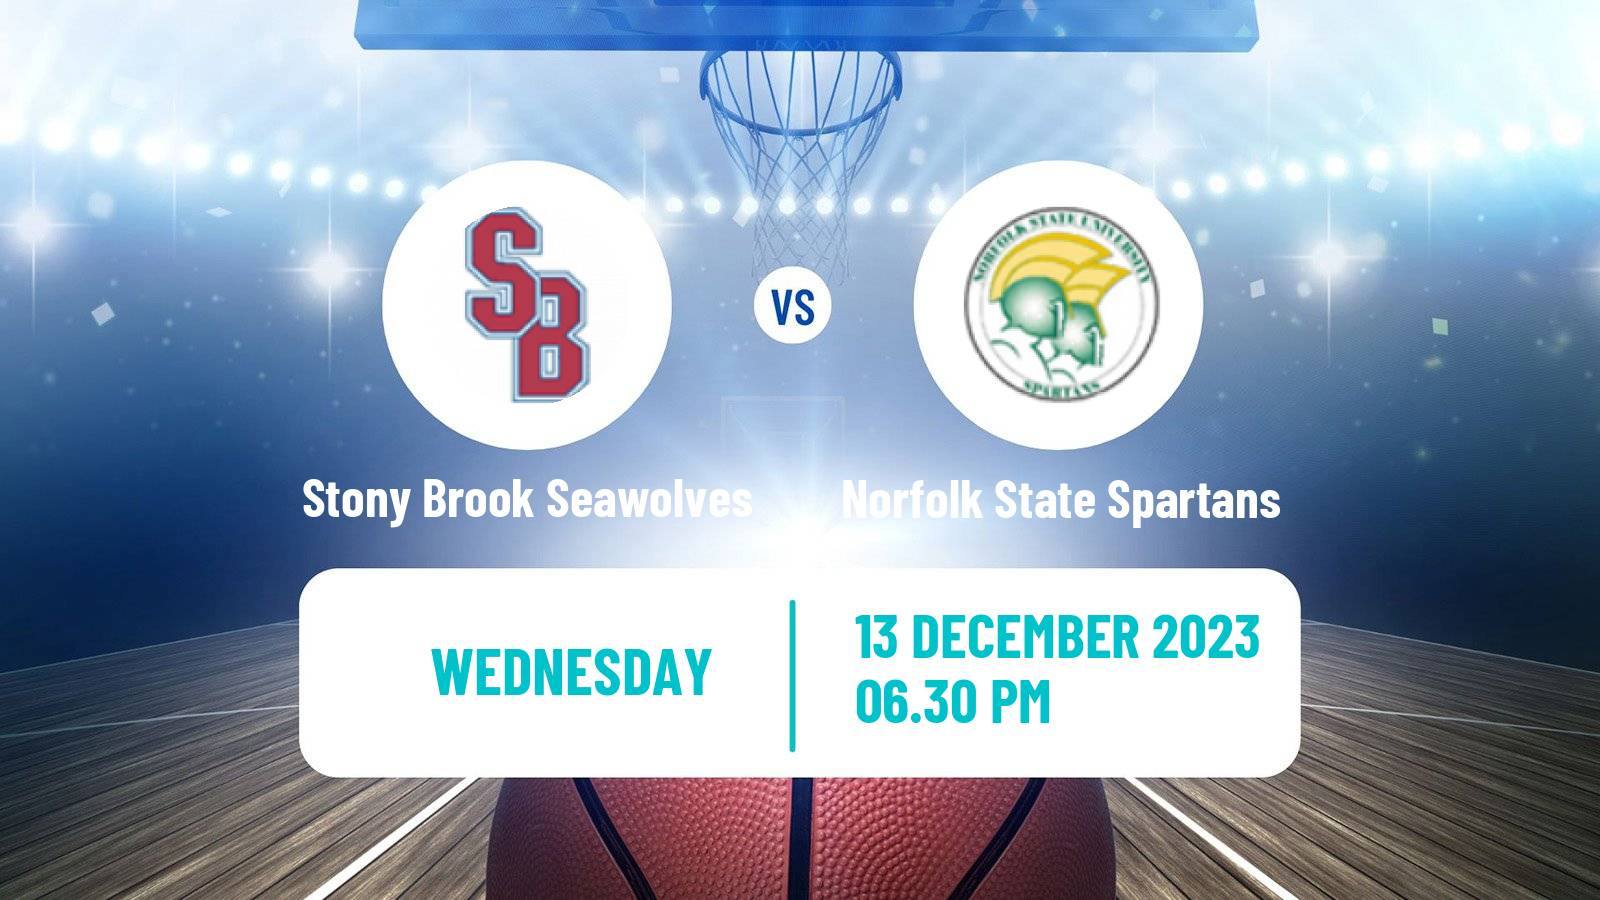 Basketball NCAA College Basketball Stony Brook Seawolves - Norfolk State Spartans